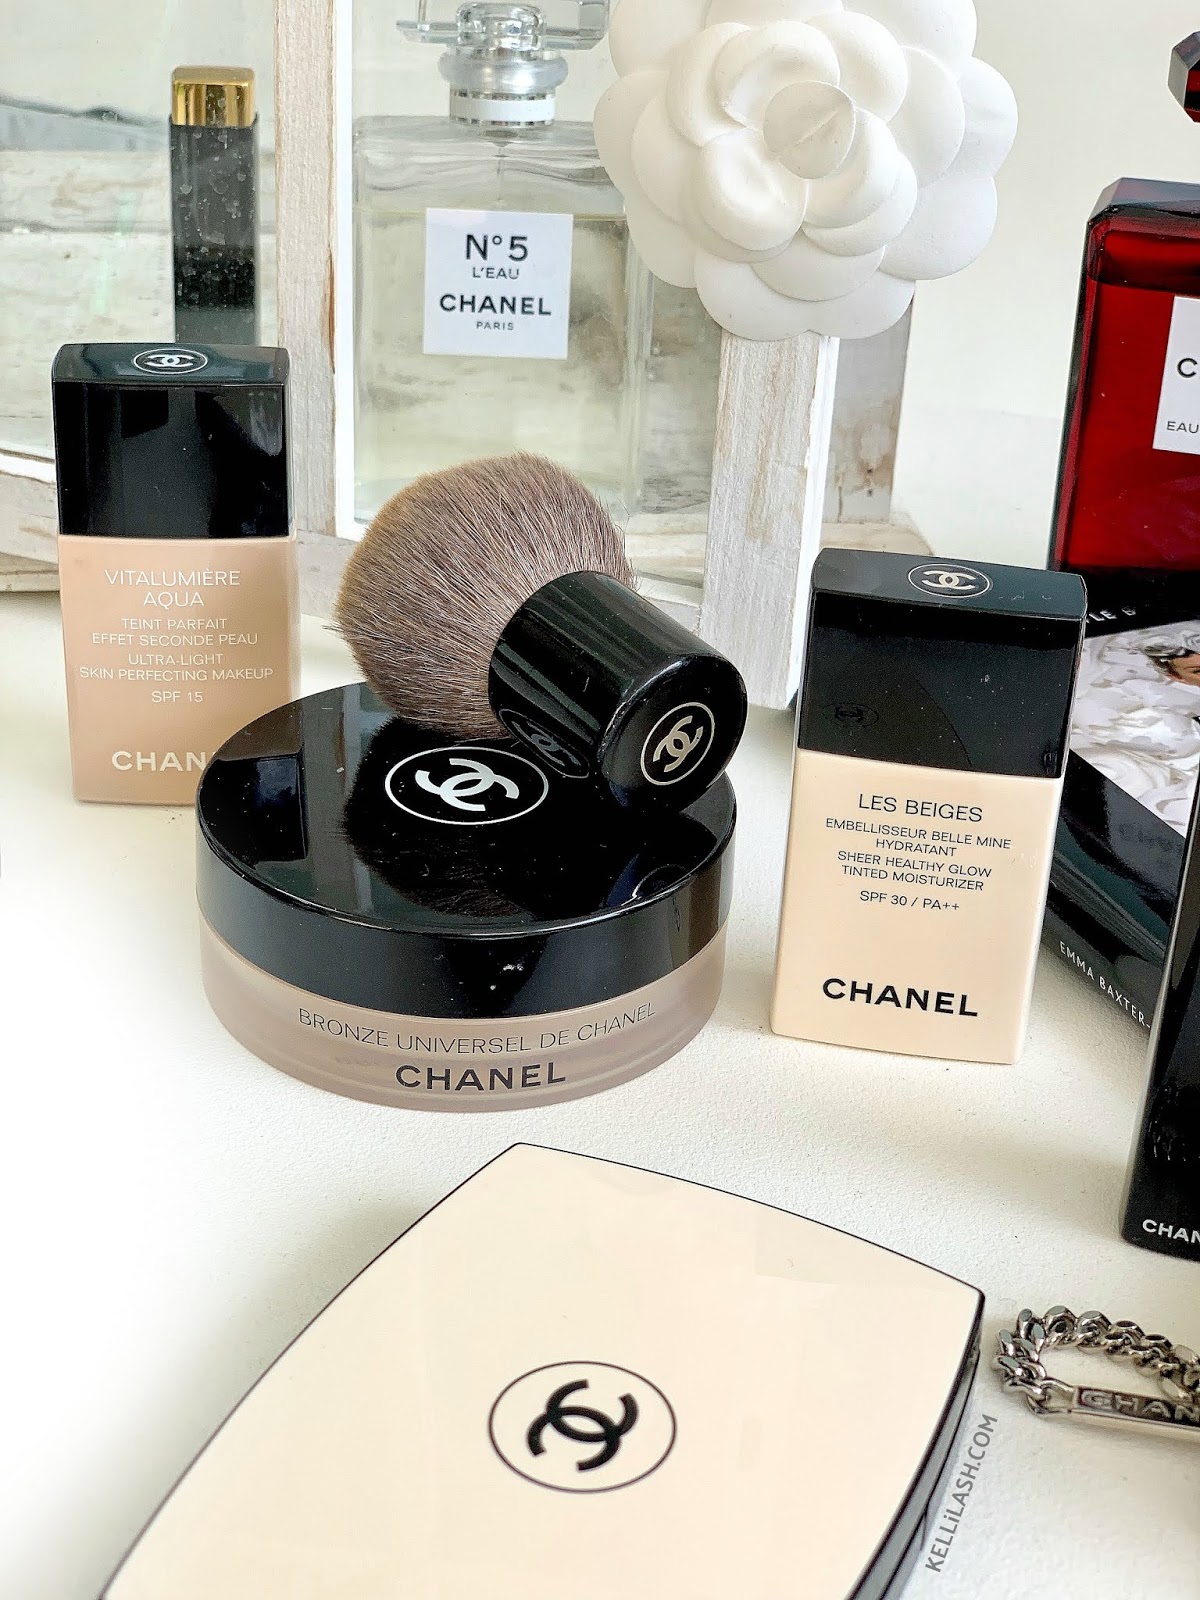 Foundation Chanel at great prices